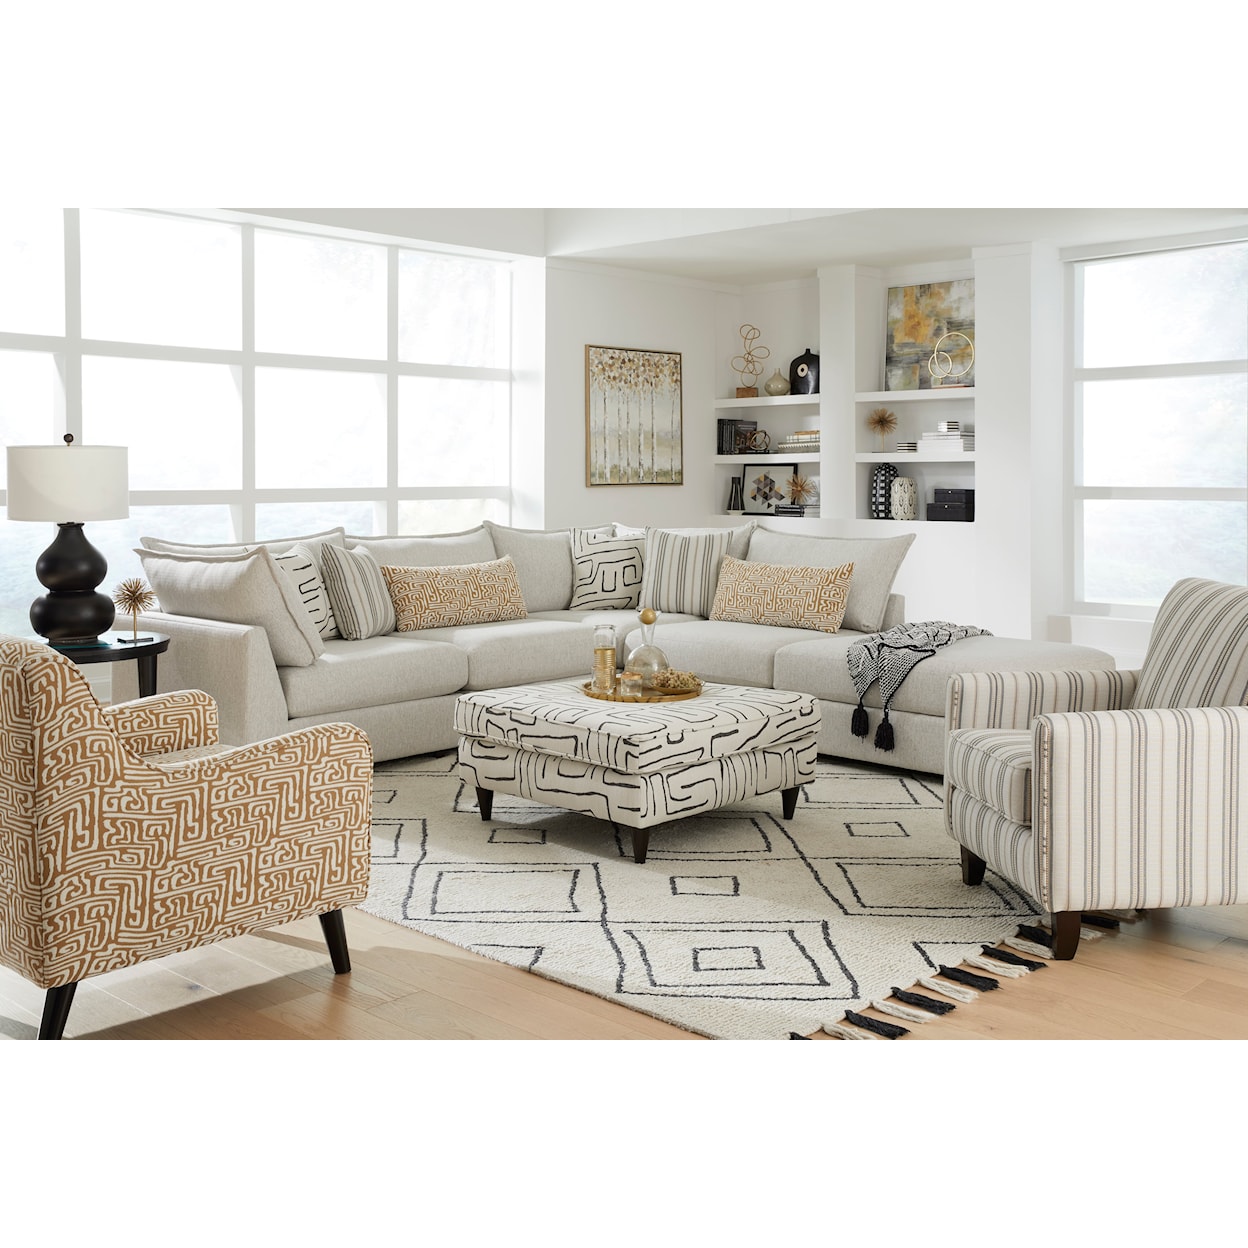 Fusion Furniture 7004 DURANGO PEWTER Sectional with Ottoman